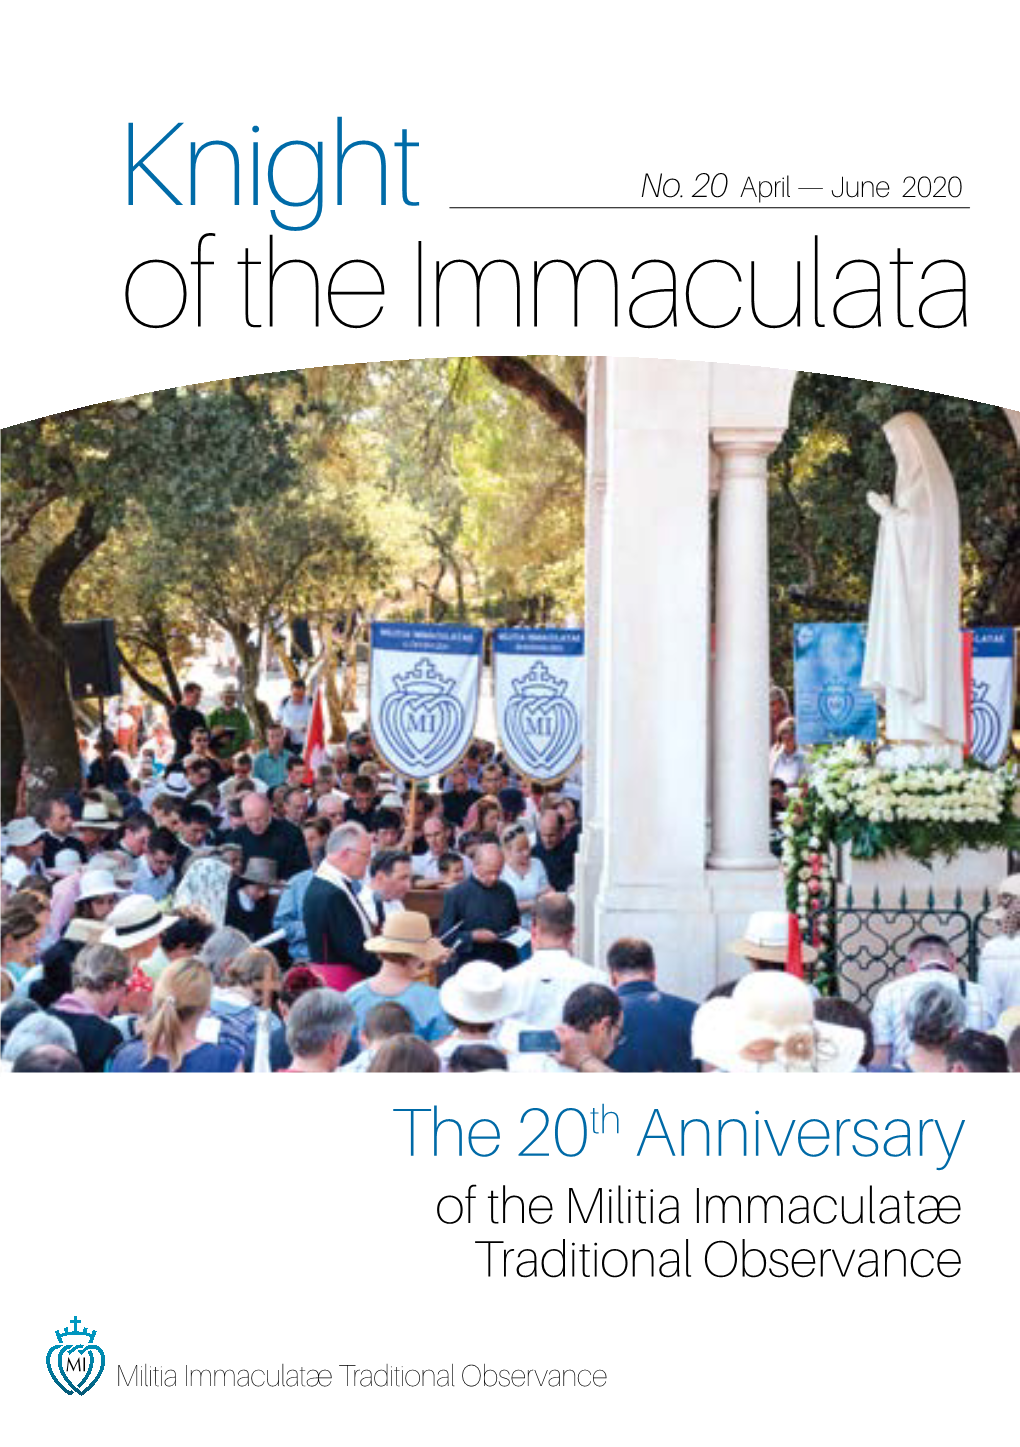 Of the Immaculata